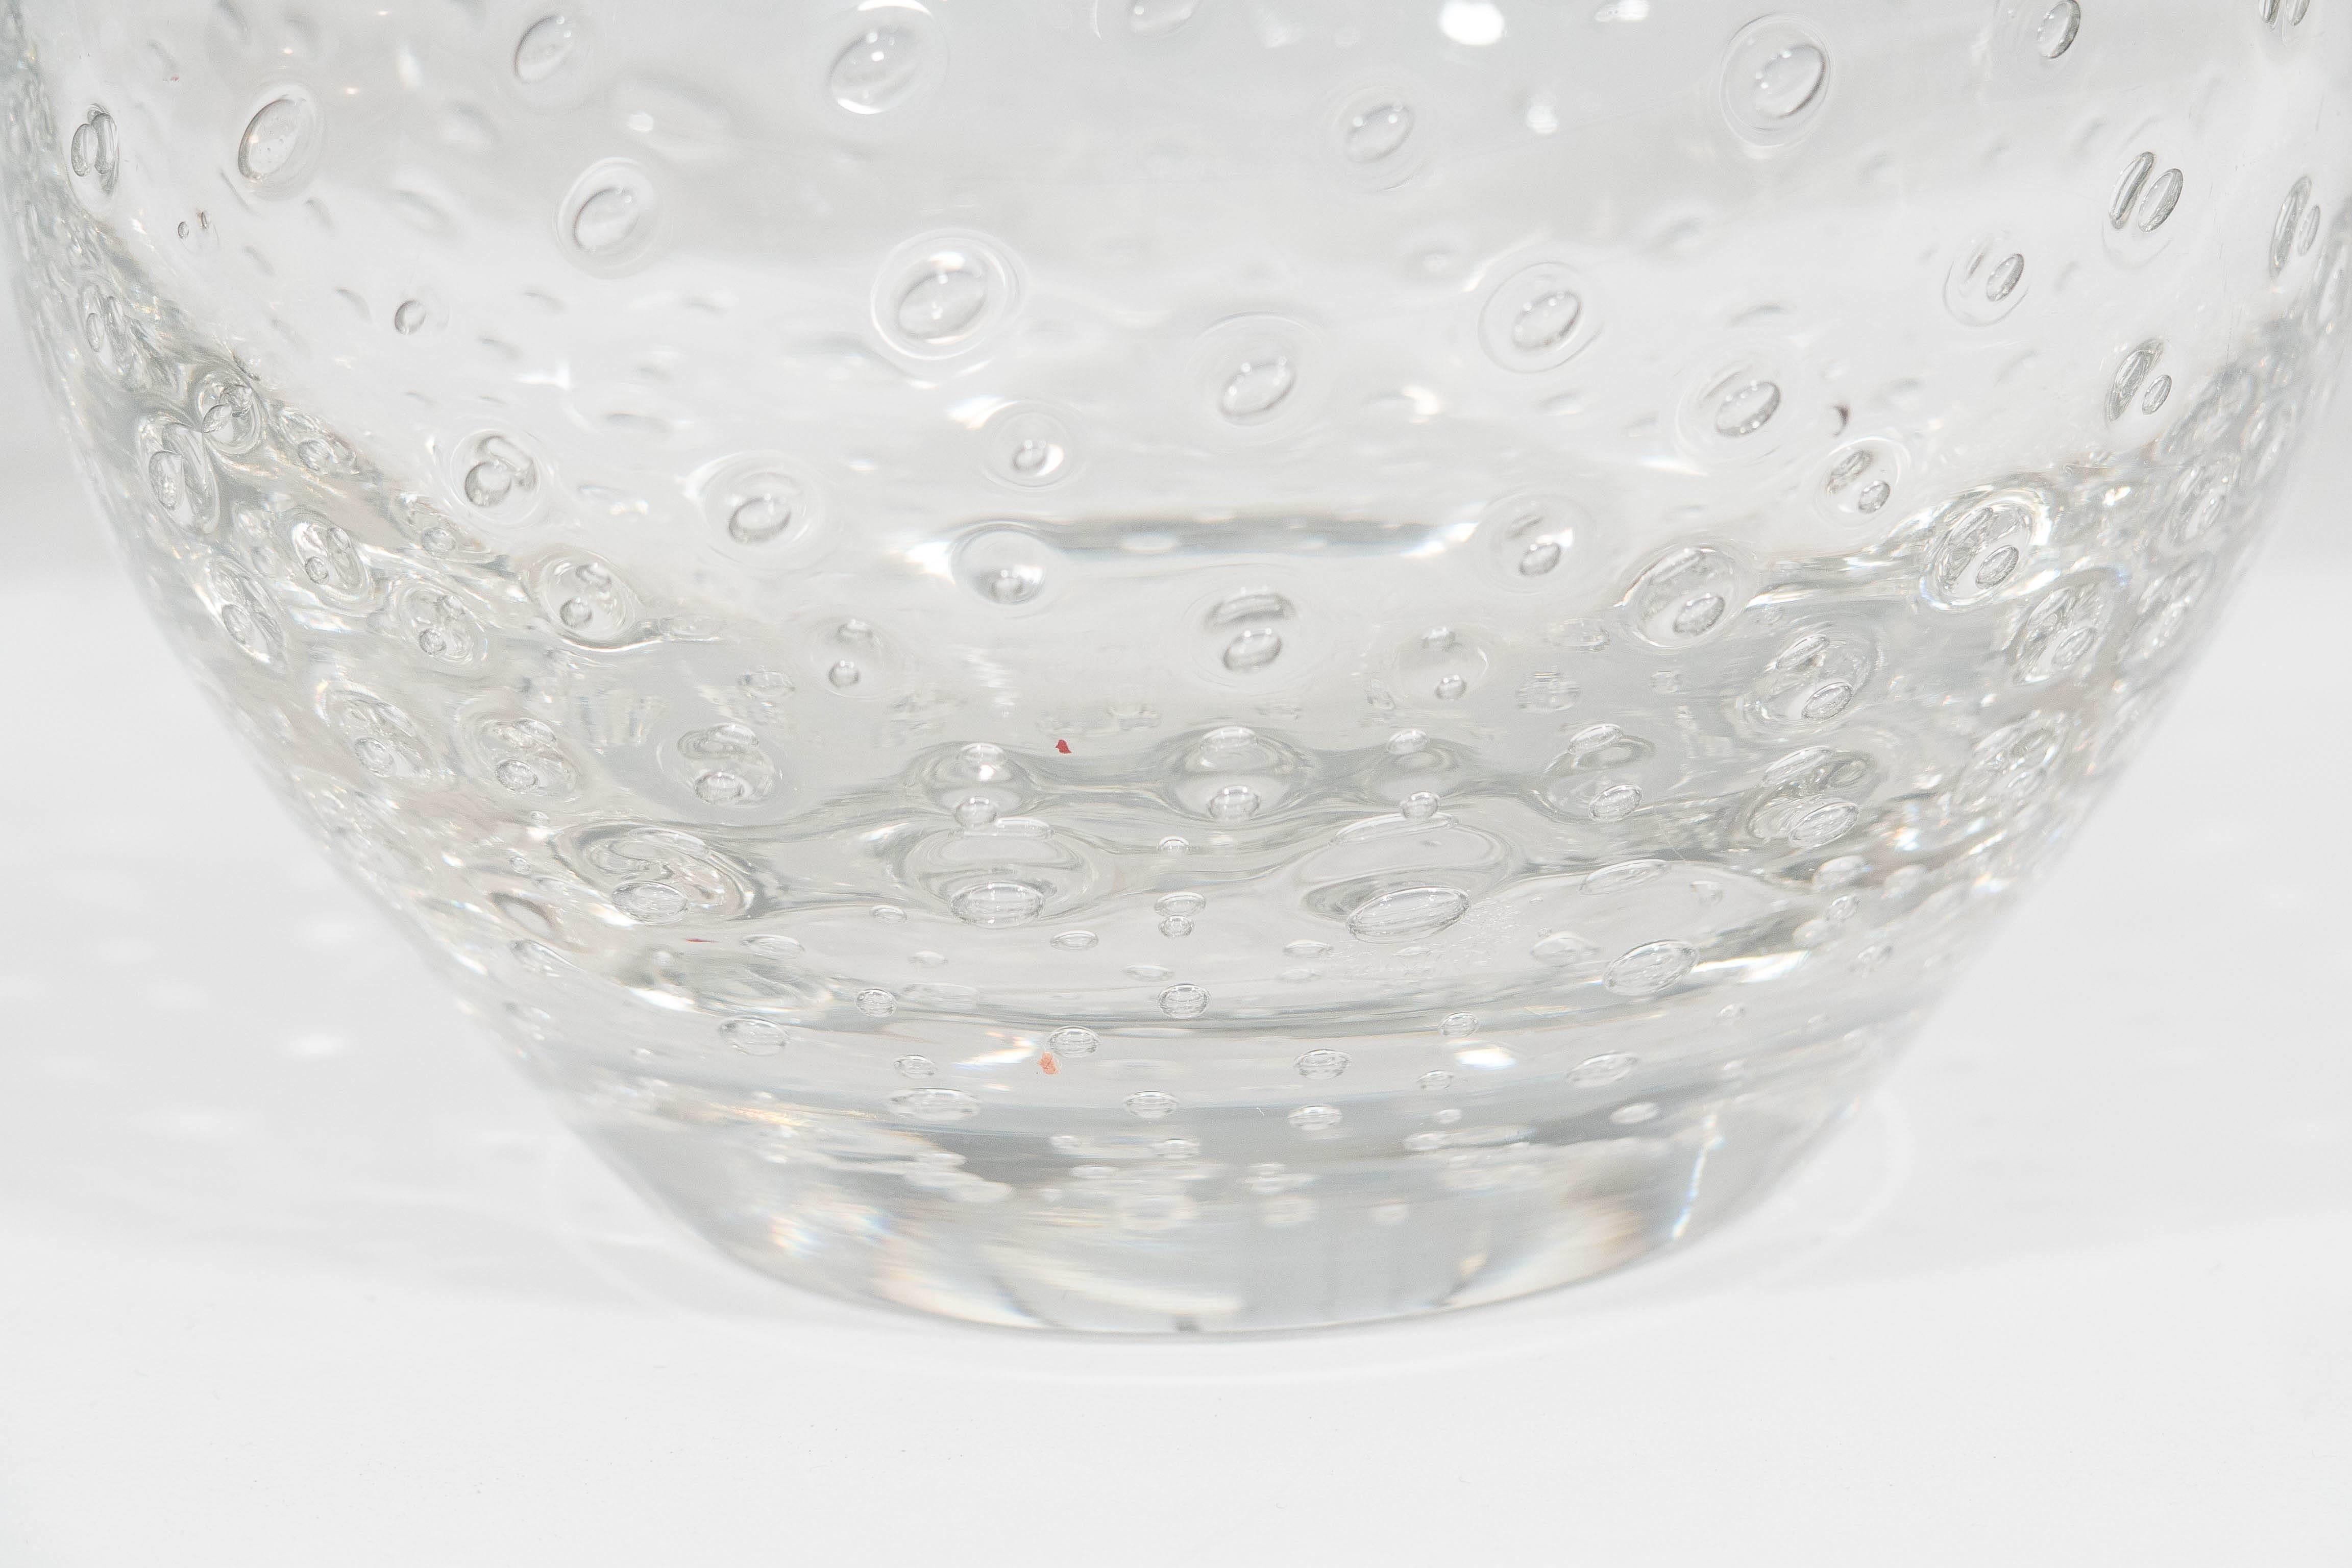 A vintage blown glass vase, originating from Sweden, with rounded body and controlled bubbles. This piece remains in very good condition, consistent with age and use.